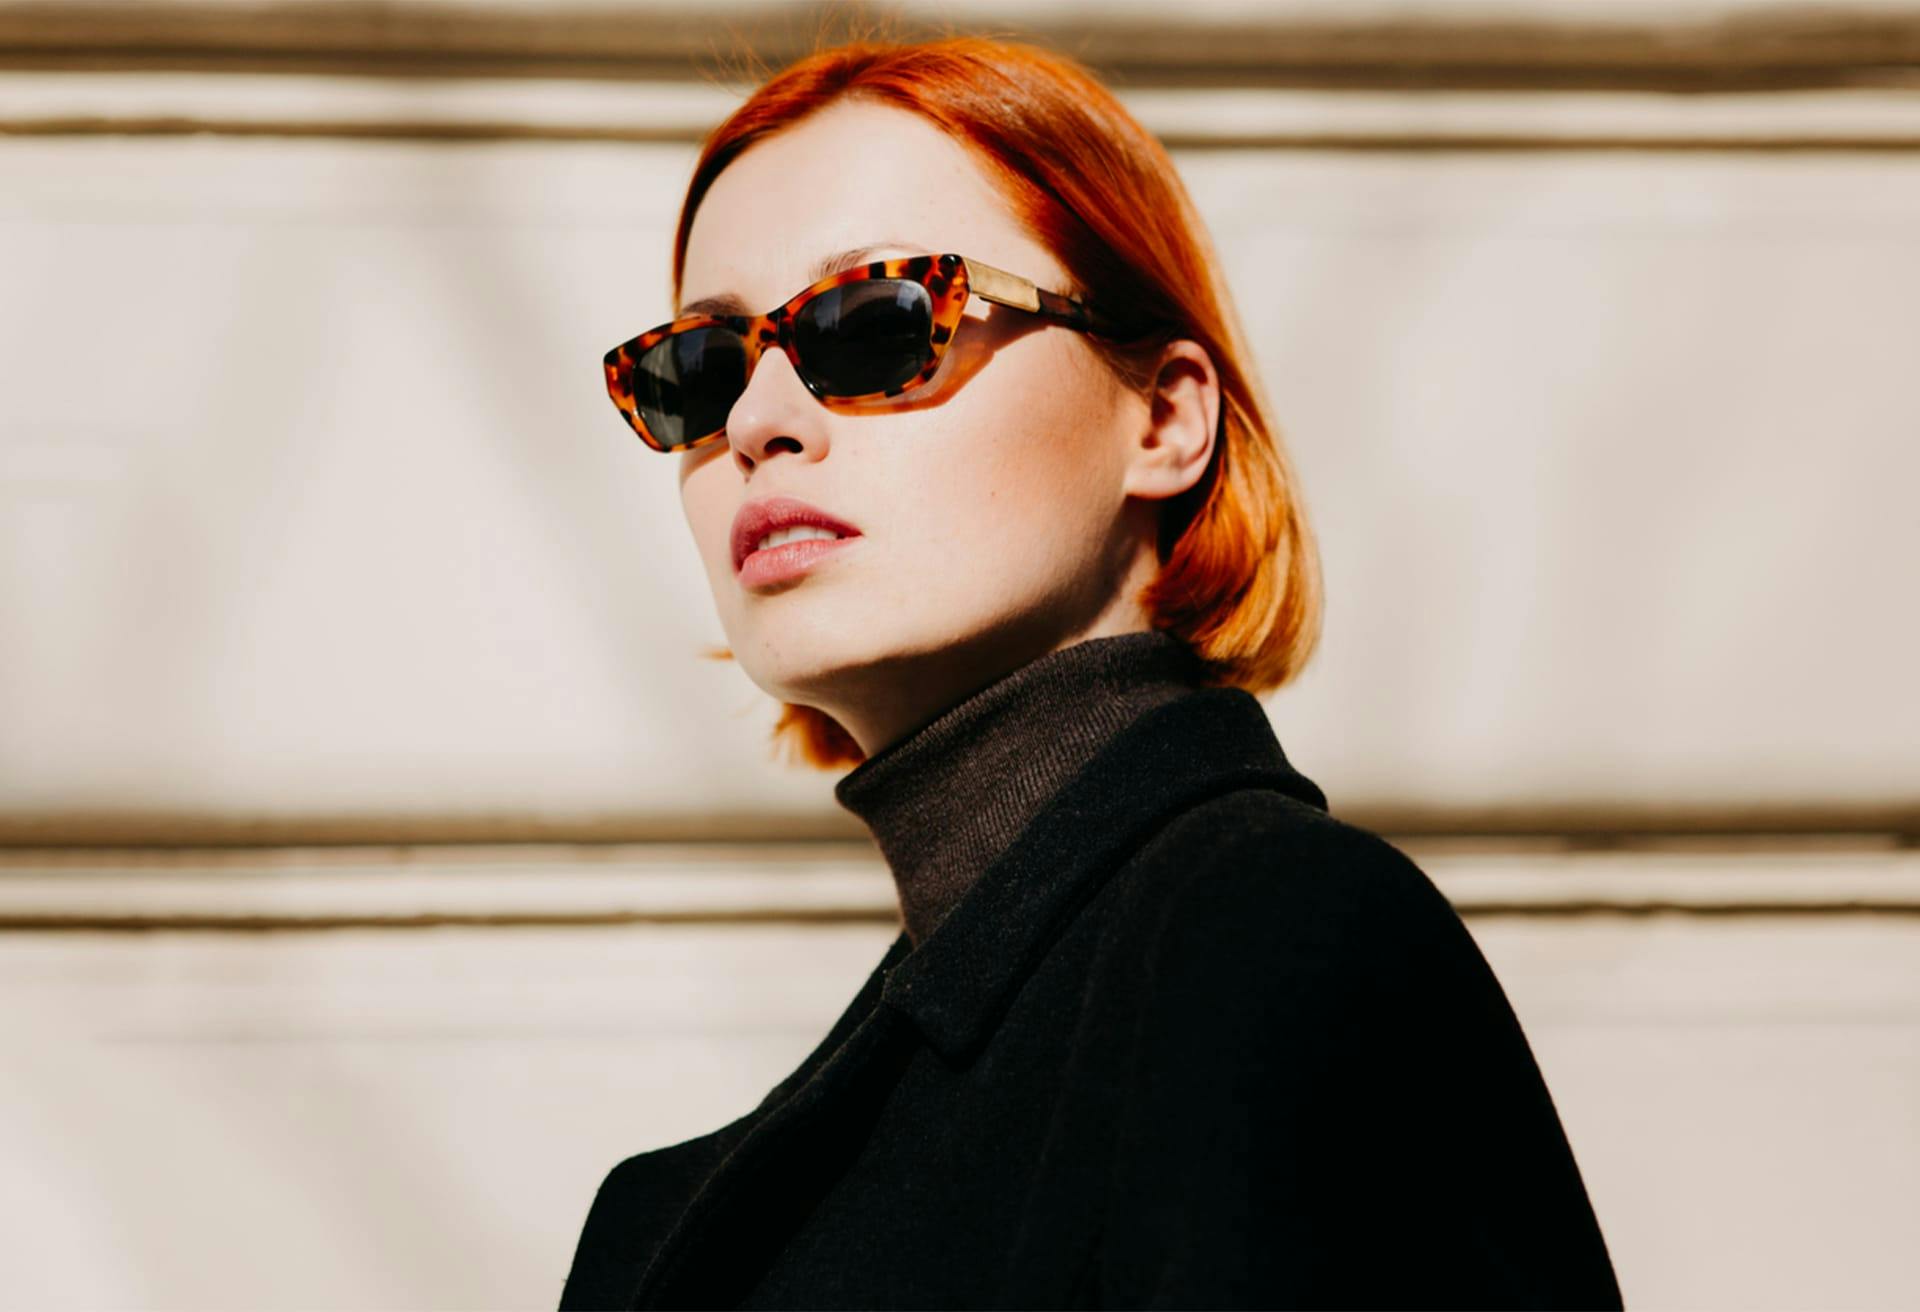 Woman with Red Hair, Sunglasses and Turtleneck